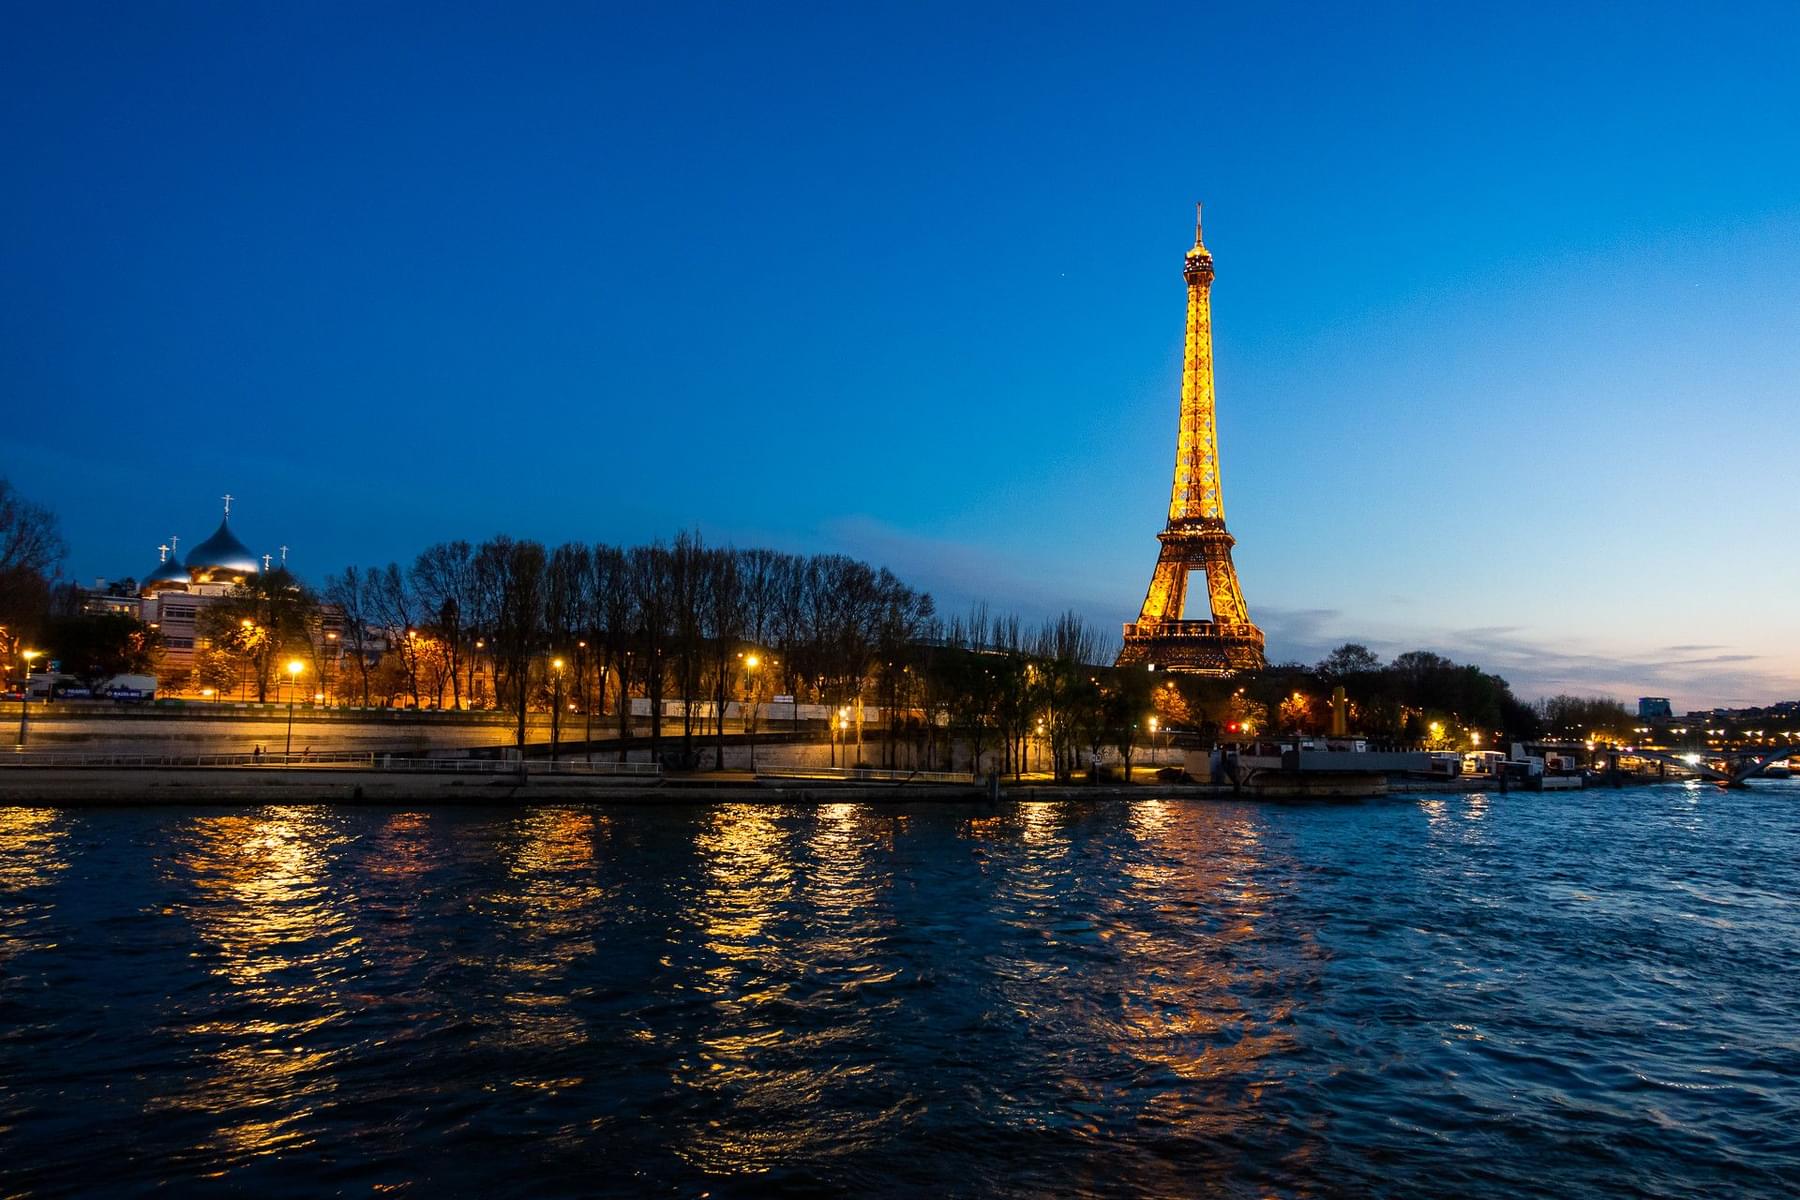 Bateaux Parisiens: Dinner Cruise with Optional Champagne Tickets